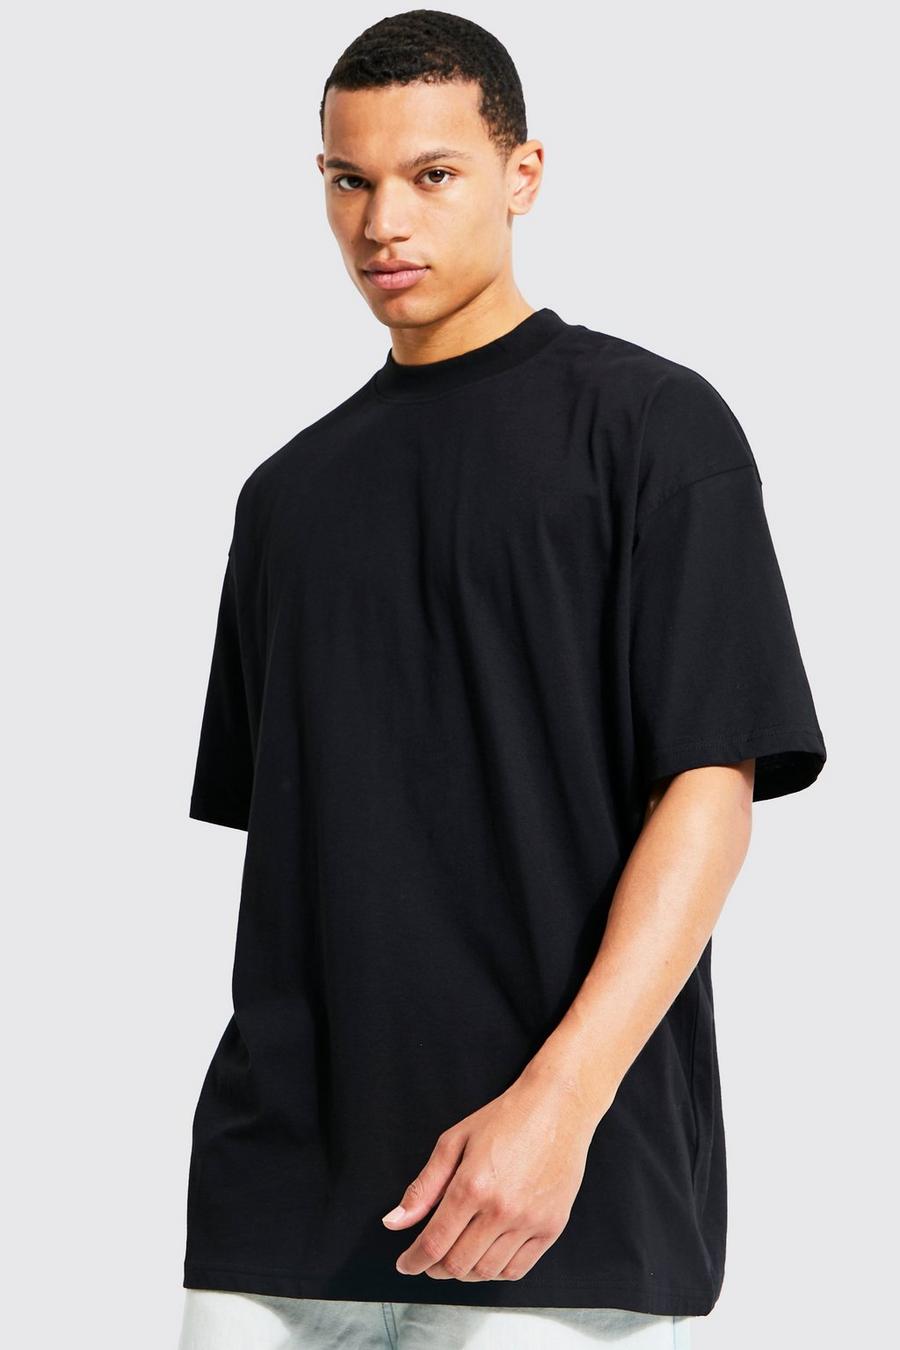 Black Tall Loose Fit Extended Neck Basic T-shirt